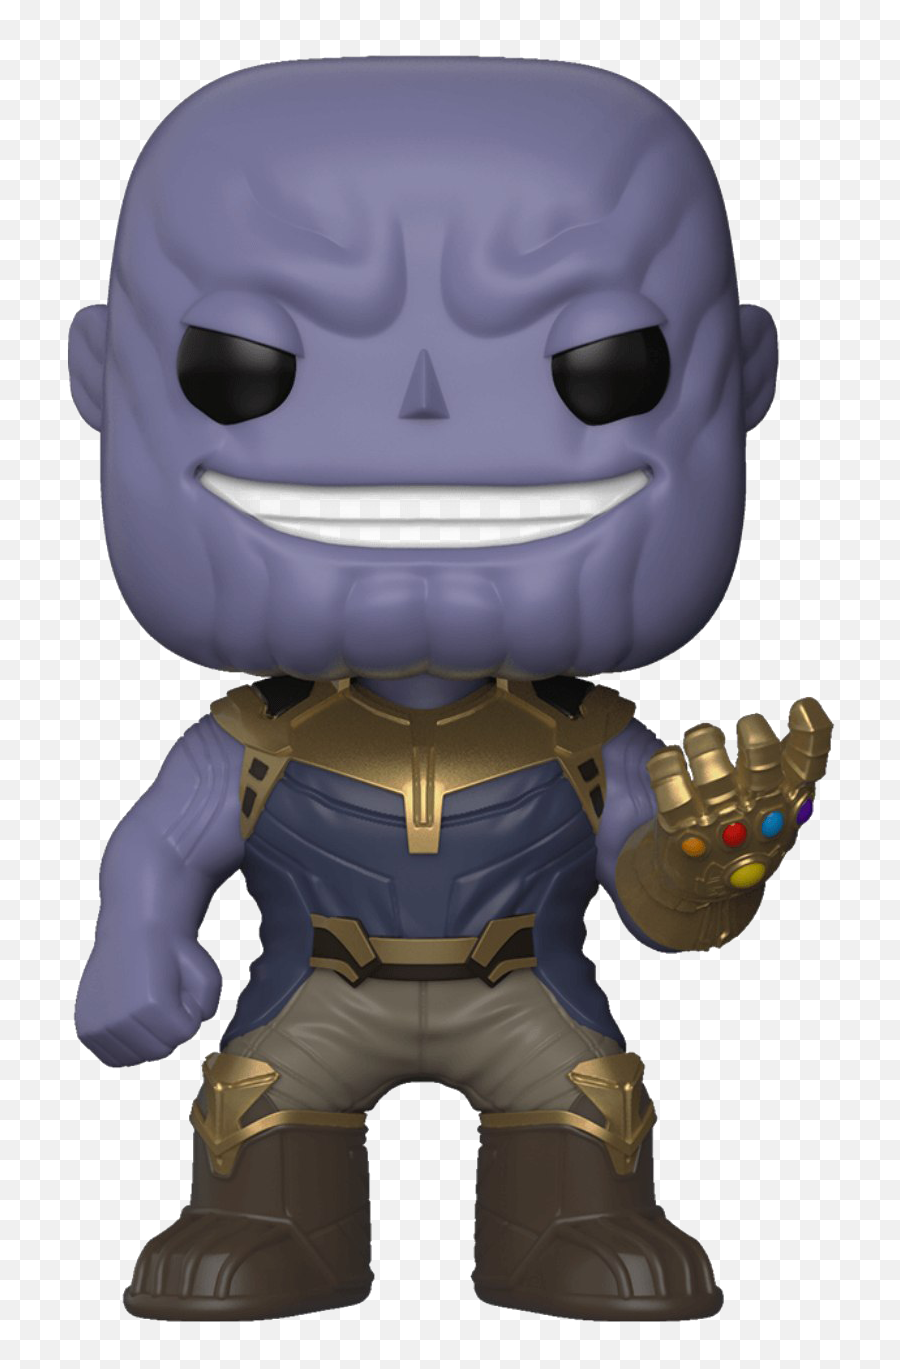 Thanos Png Image Background - Funko Pop Thanos Infinity War,Thanos Png